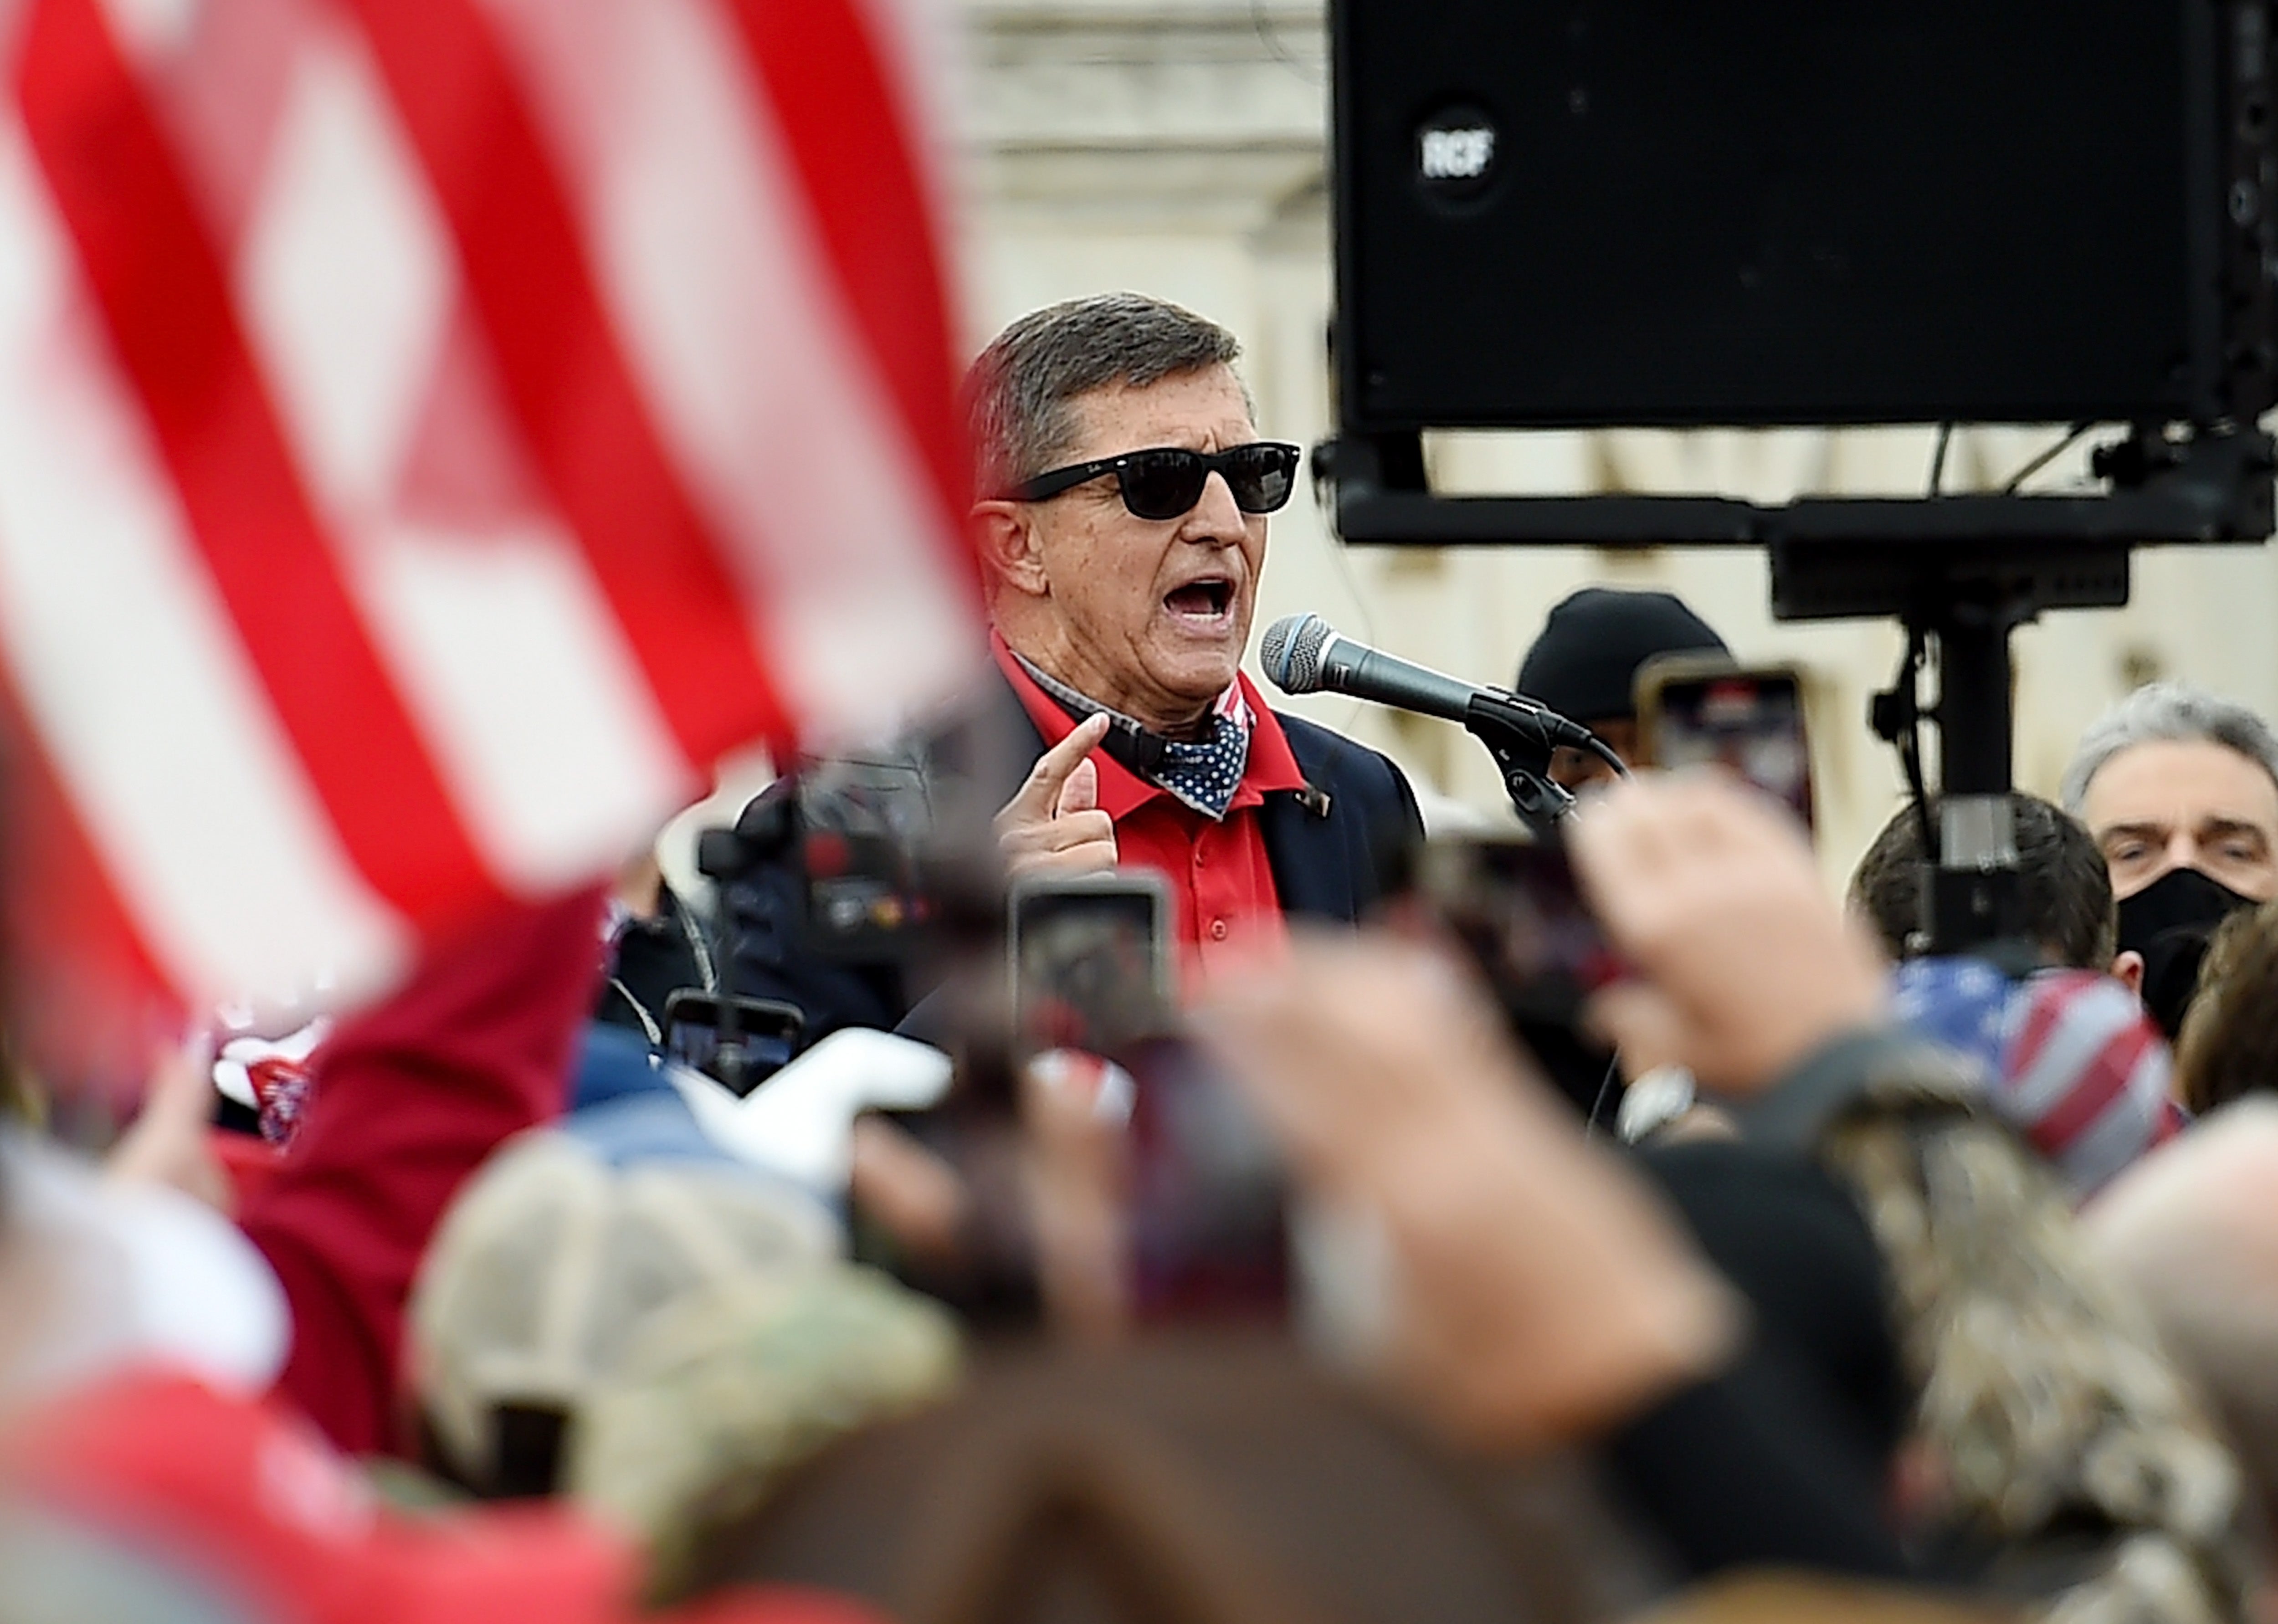 Former US National Security Advisor Michael Flynn speaks to supporters of US President Donald Trump during the Million MAGA March to protest the outcome of the 2020 presidential election in front of the US Supreme Court on December 12, 2020 in Washington, DC. (